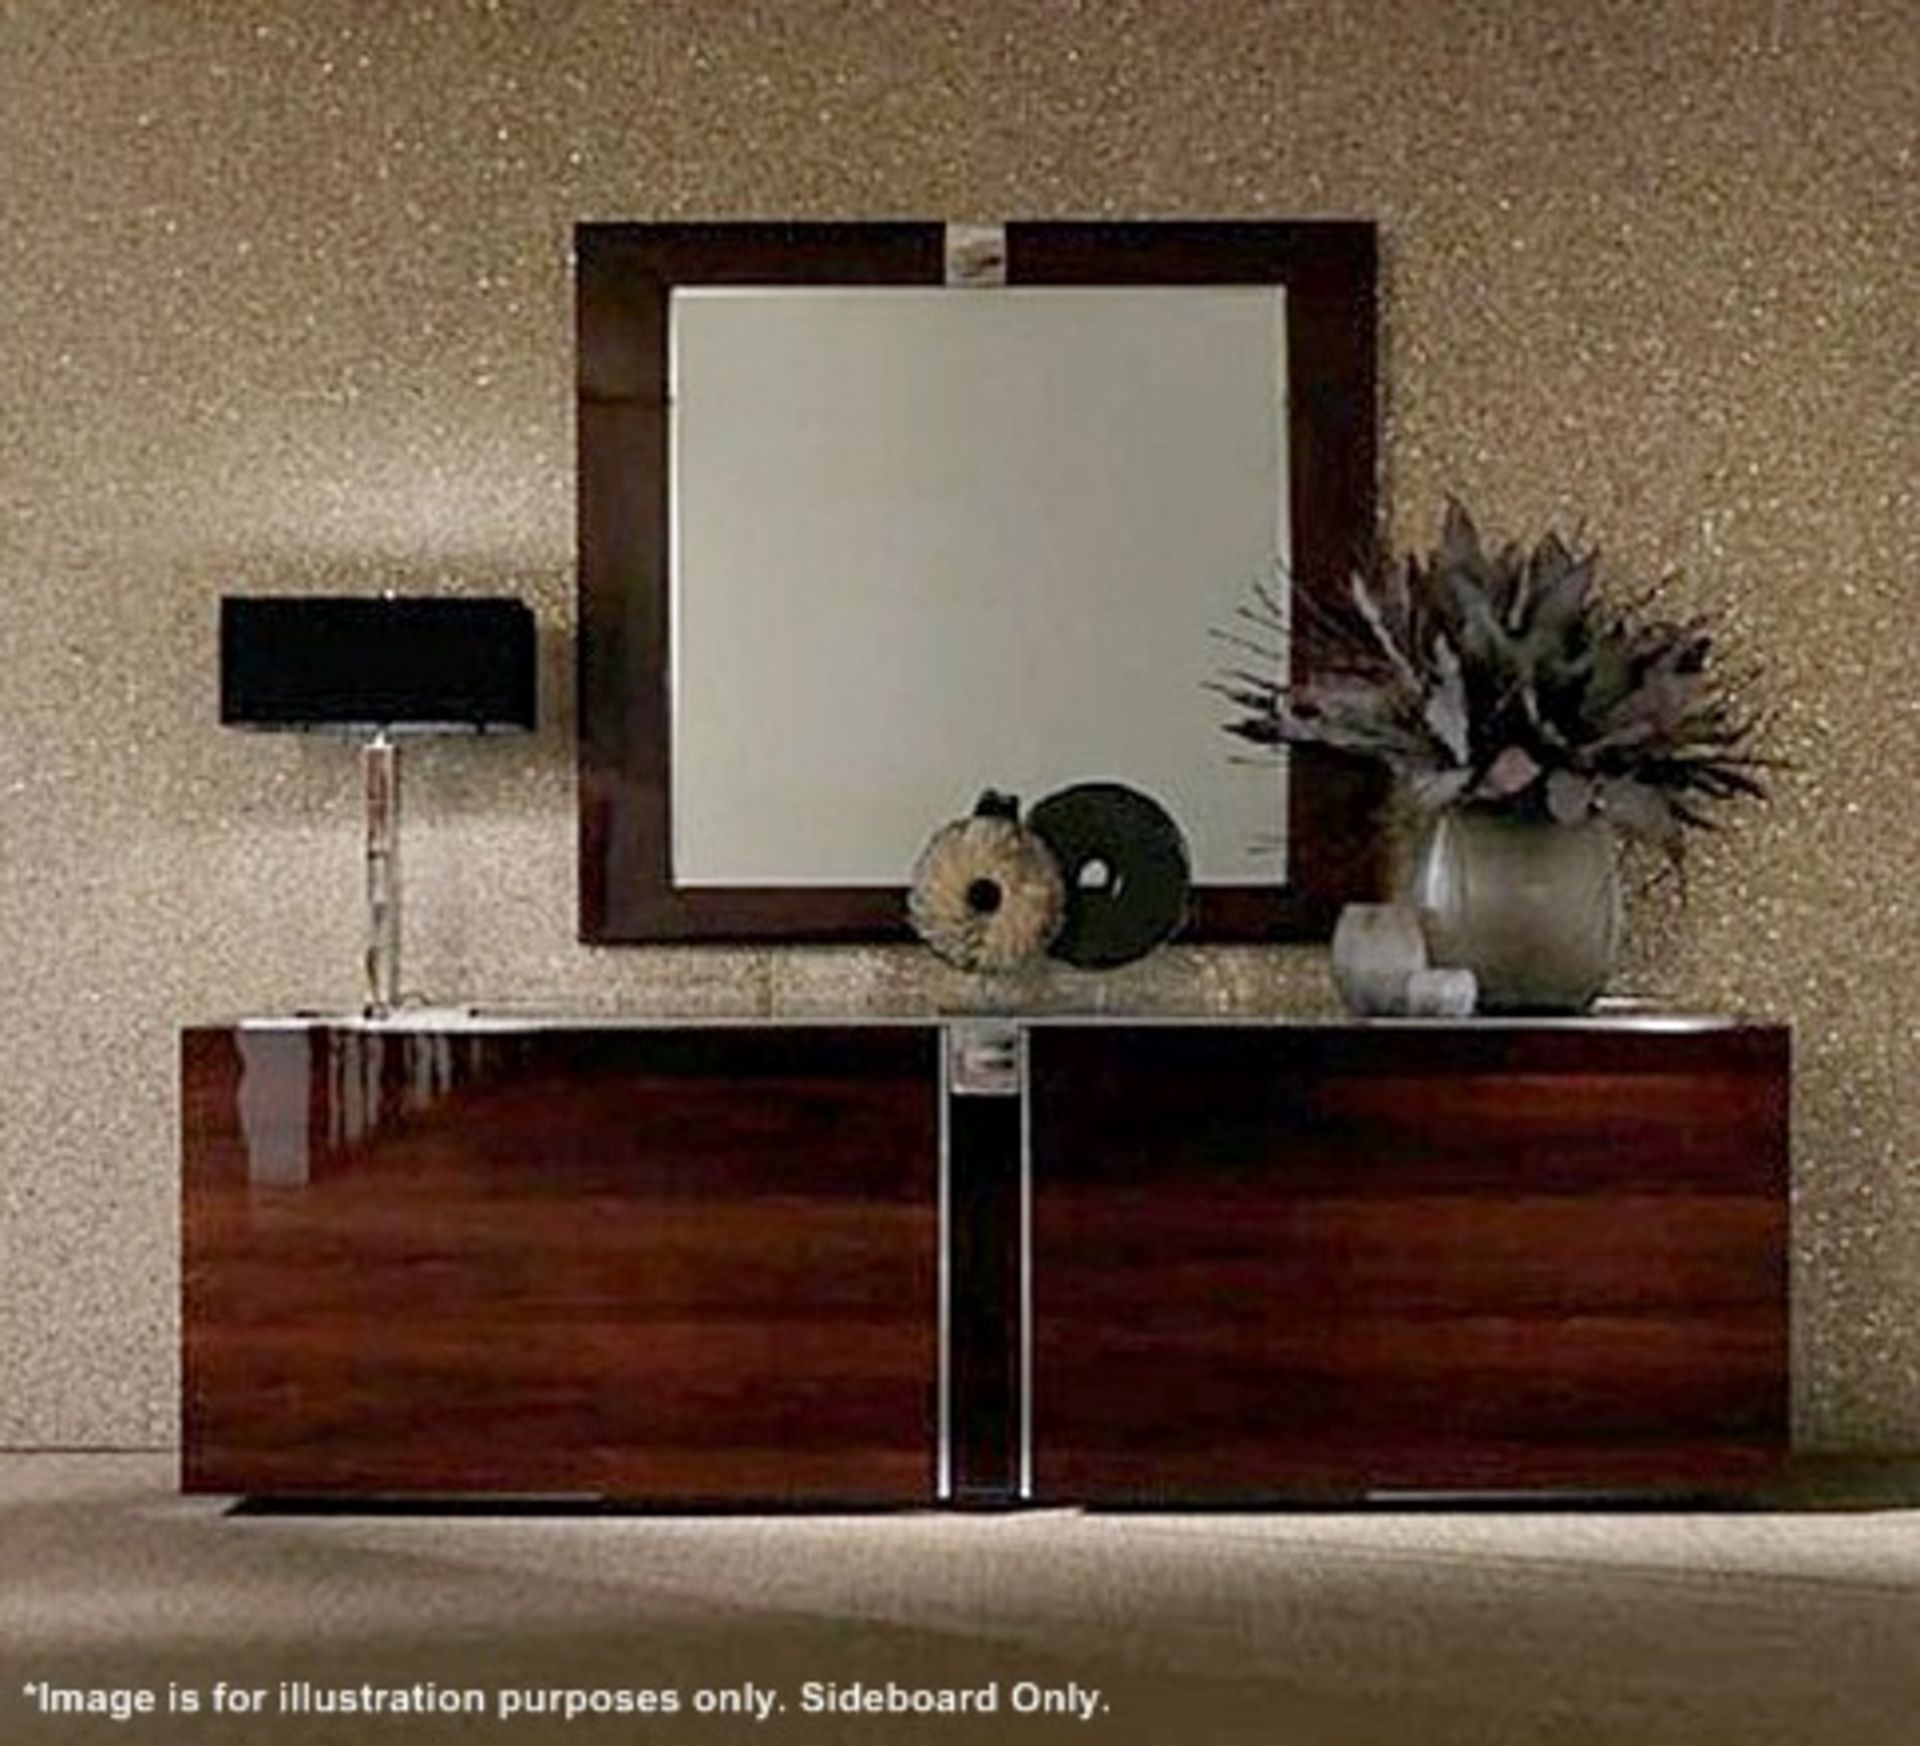 1 x MALERBA "Dress Code" Buffet  / Sideboard - Made From South African Karoo With Lacquer Finish -